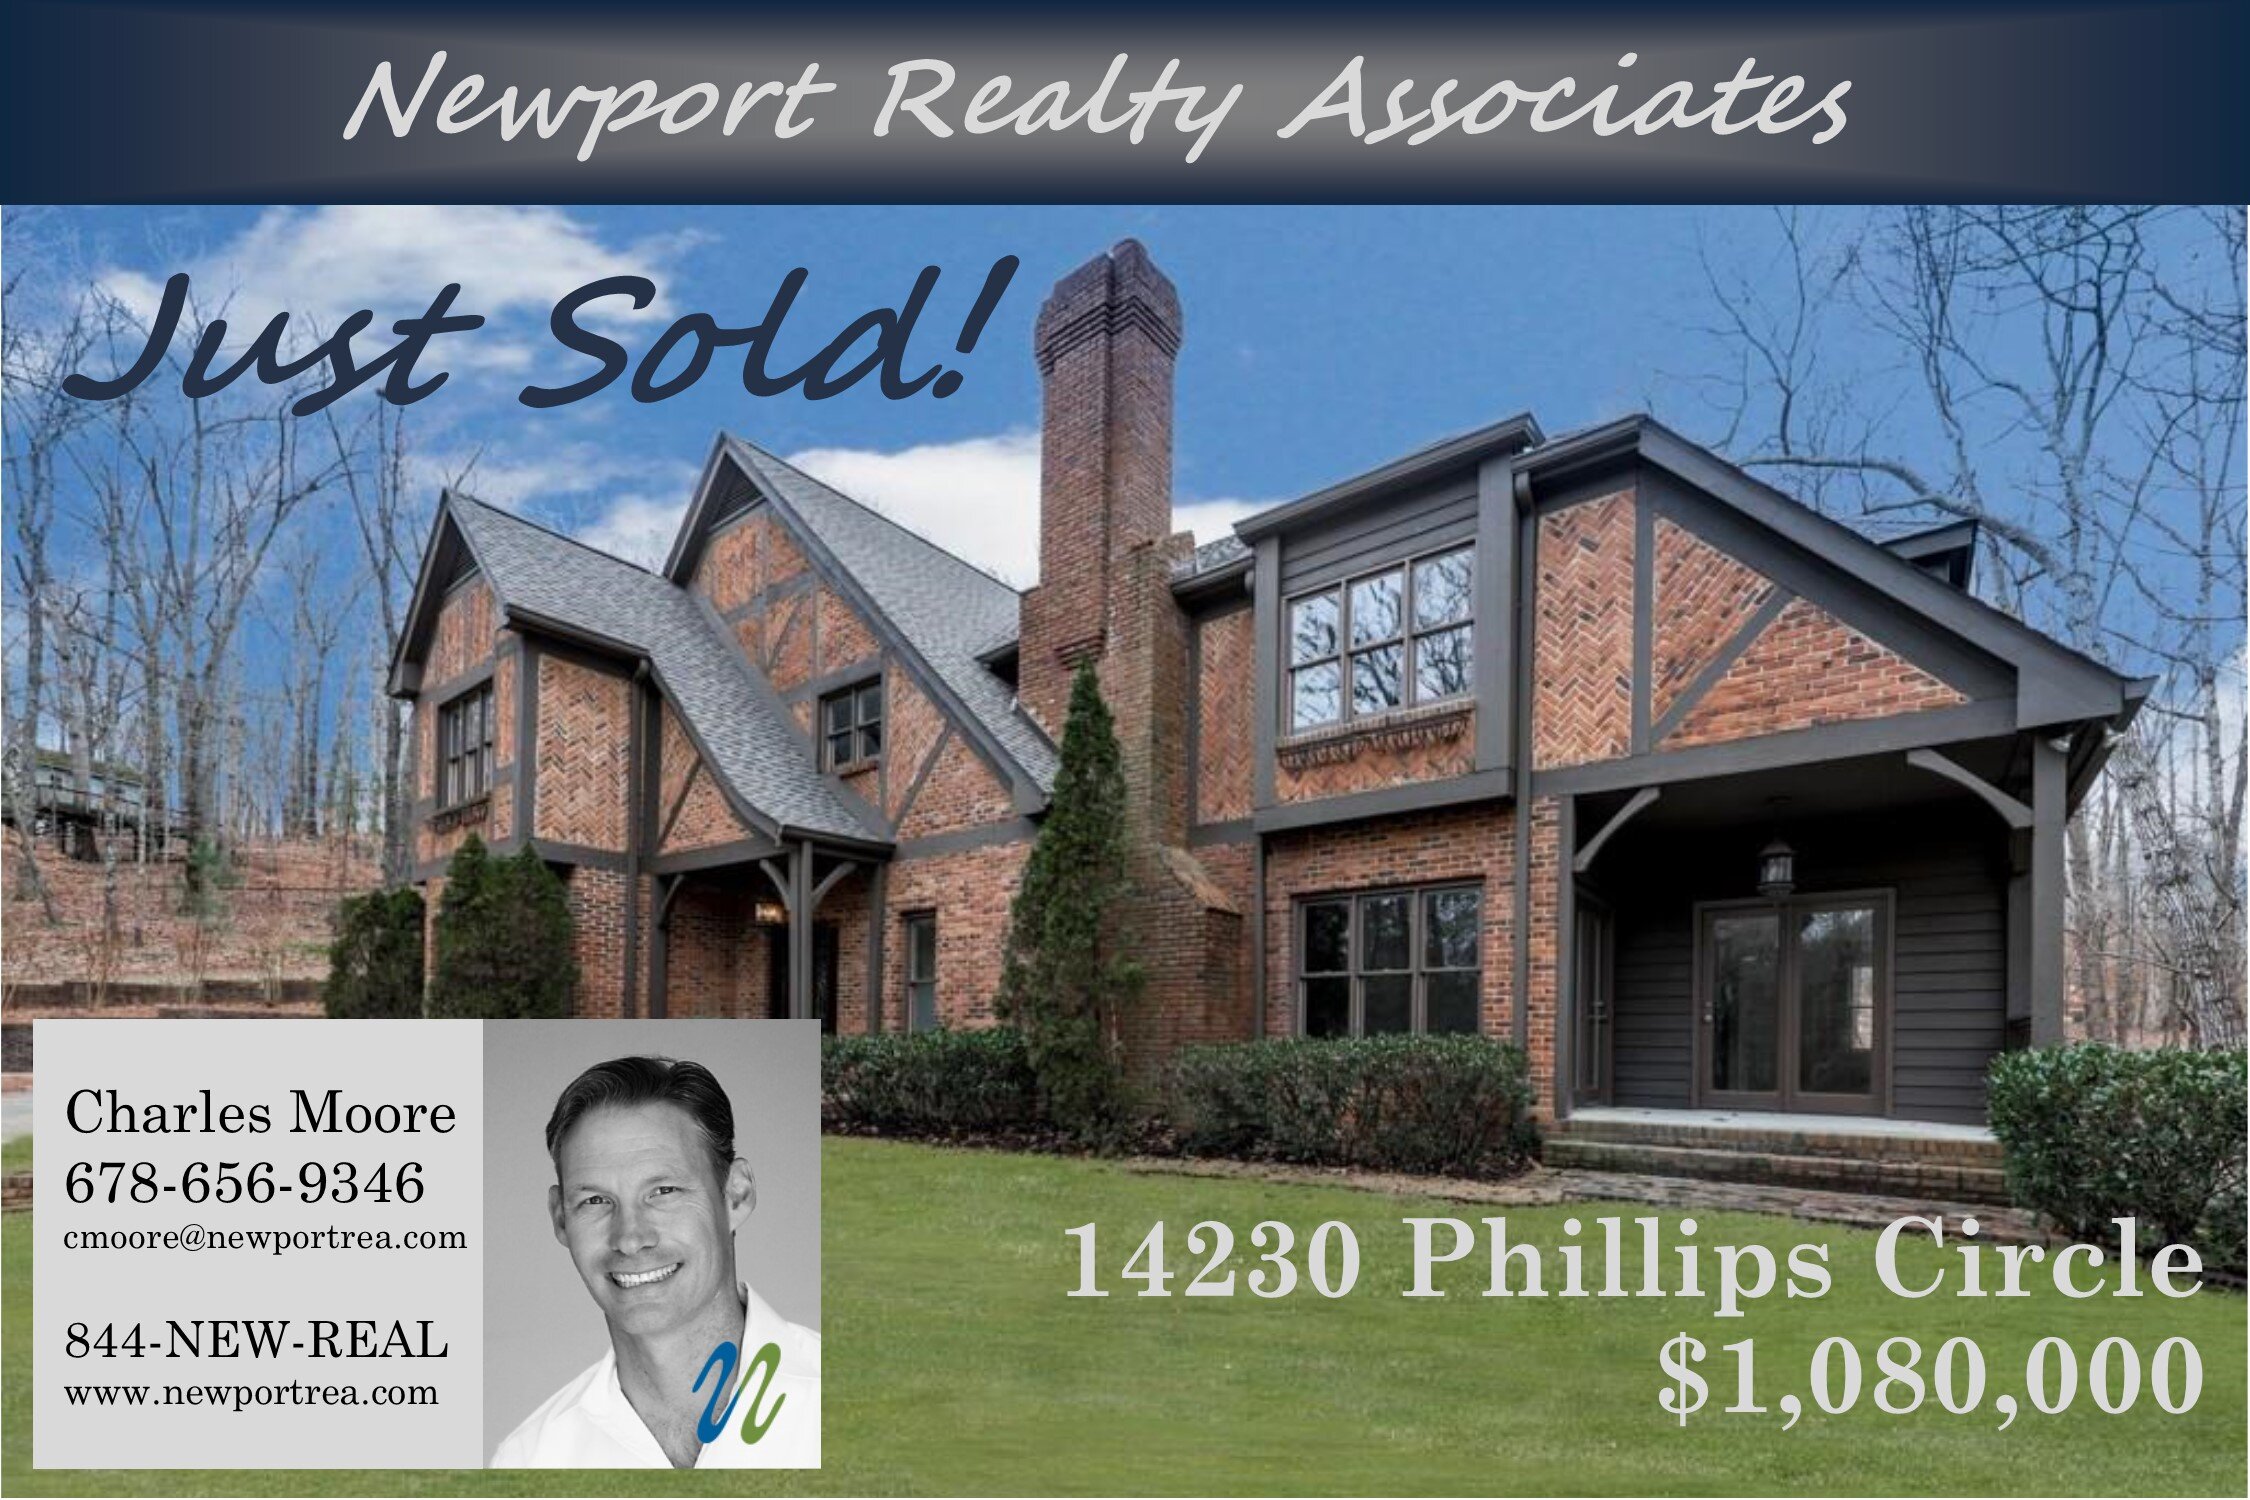 Phillips Circle  Just Sold.jpg